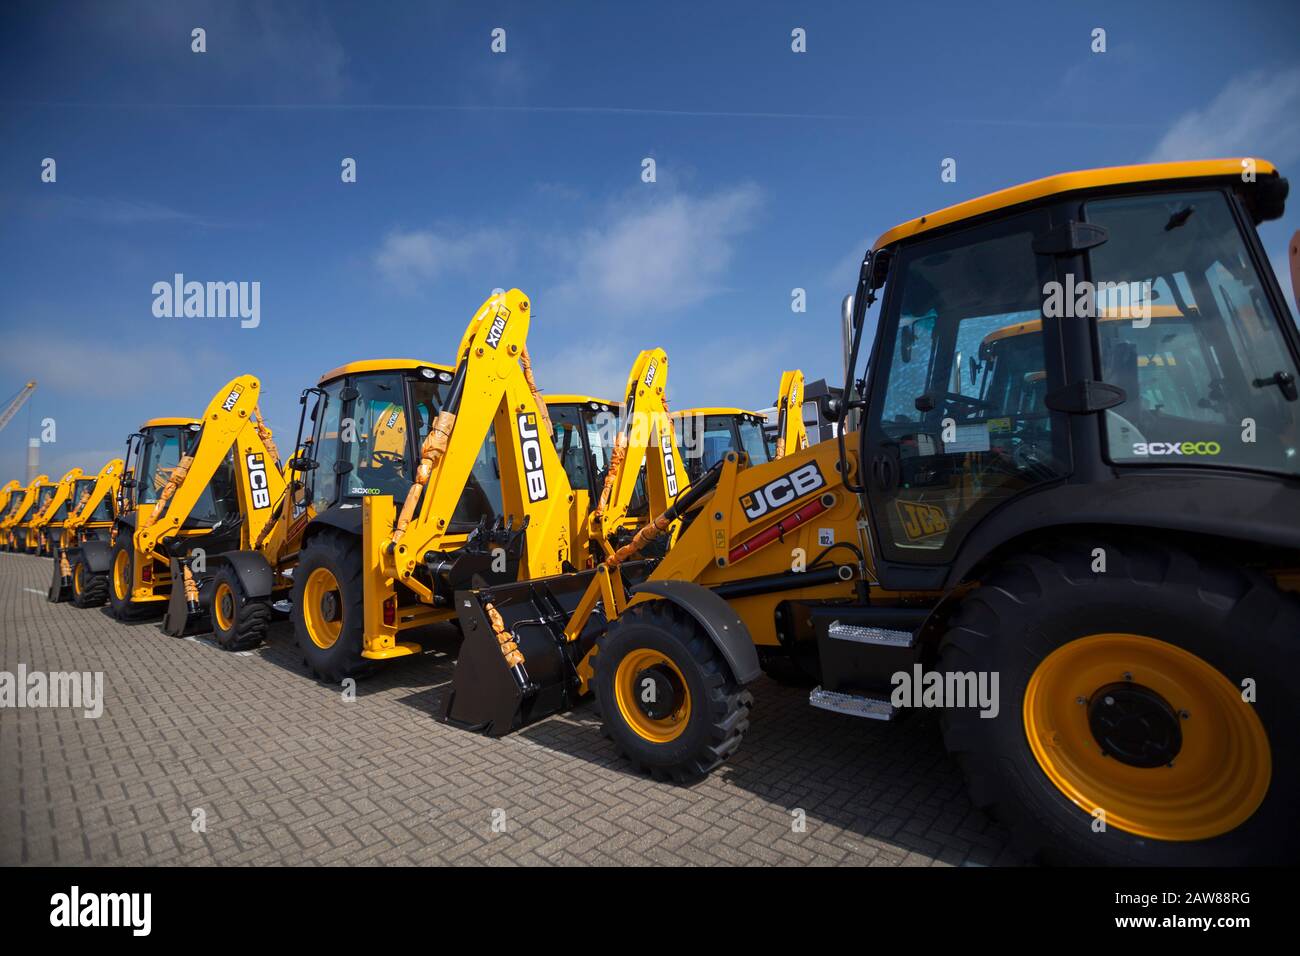 JCB Diggers for Export ro ro Stock Photo